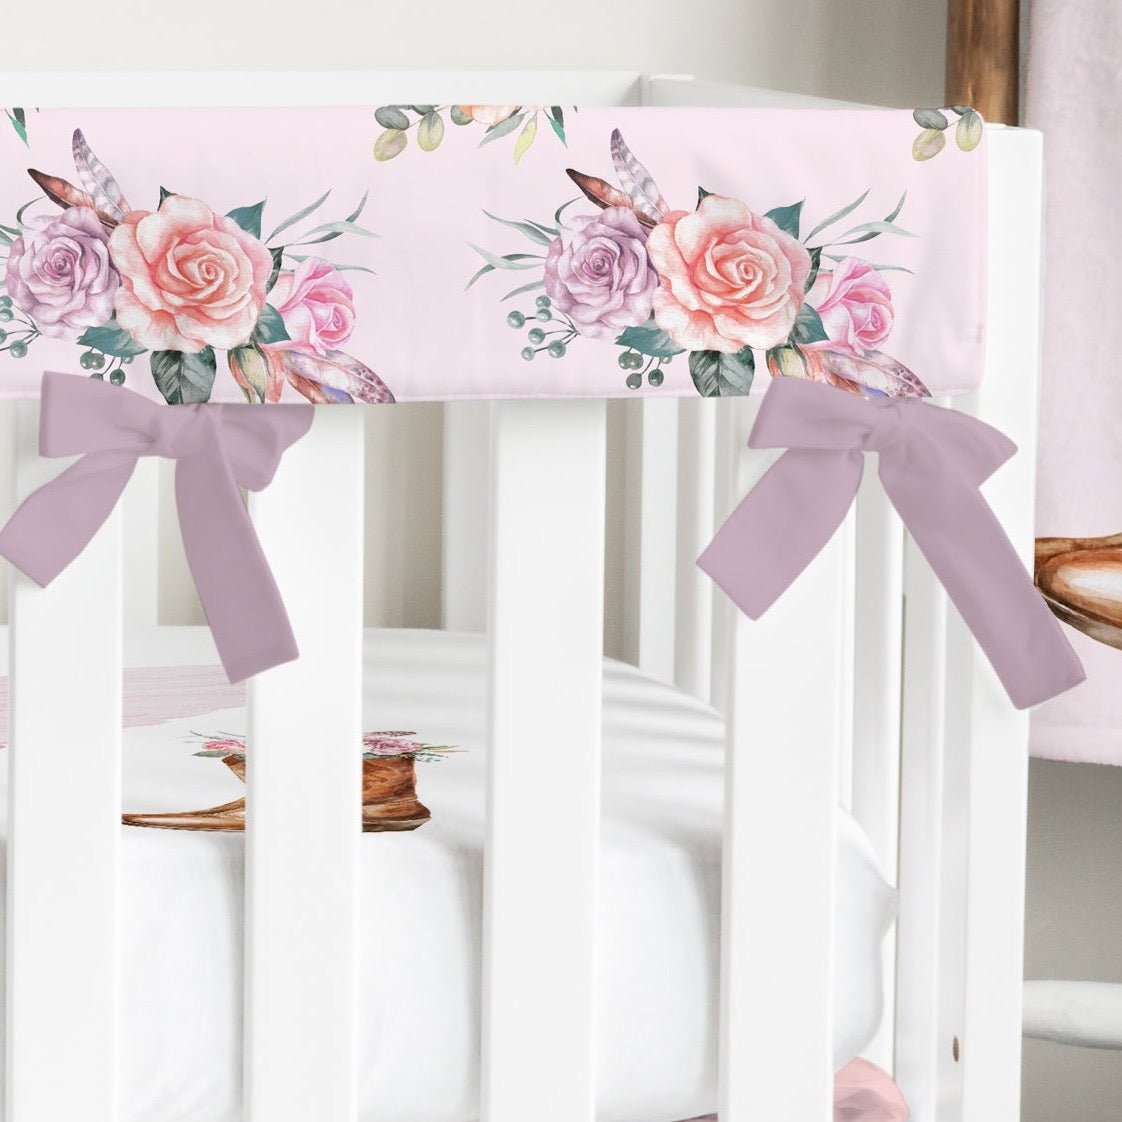 Floral Cowgirl Crib Rail Guards - Floral Cowgirl, gender_girl, Theme_Floral